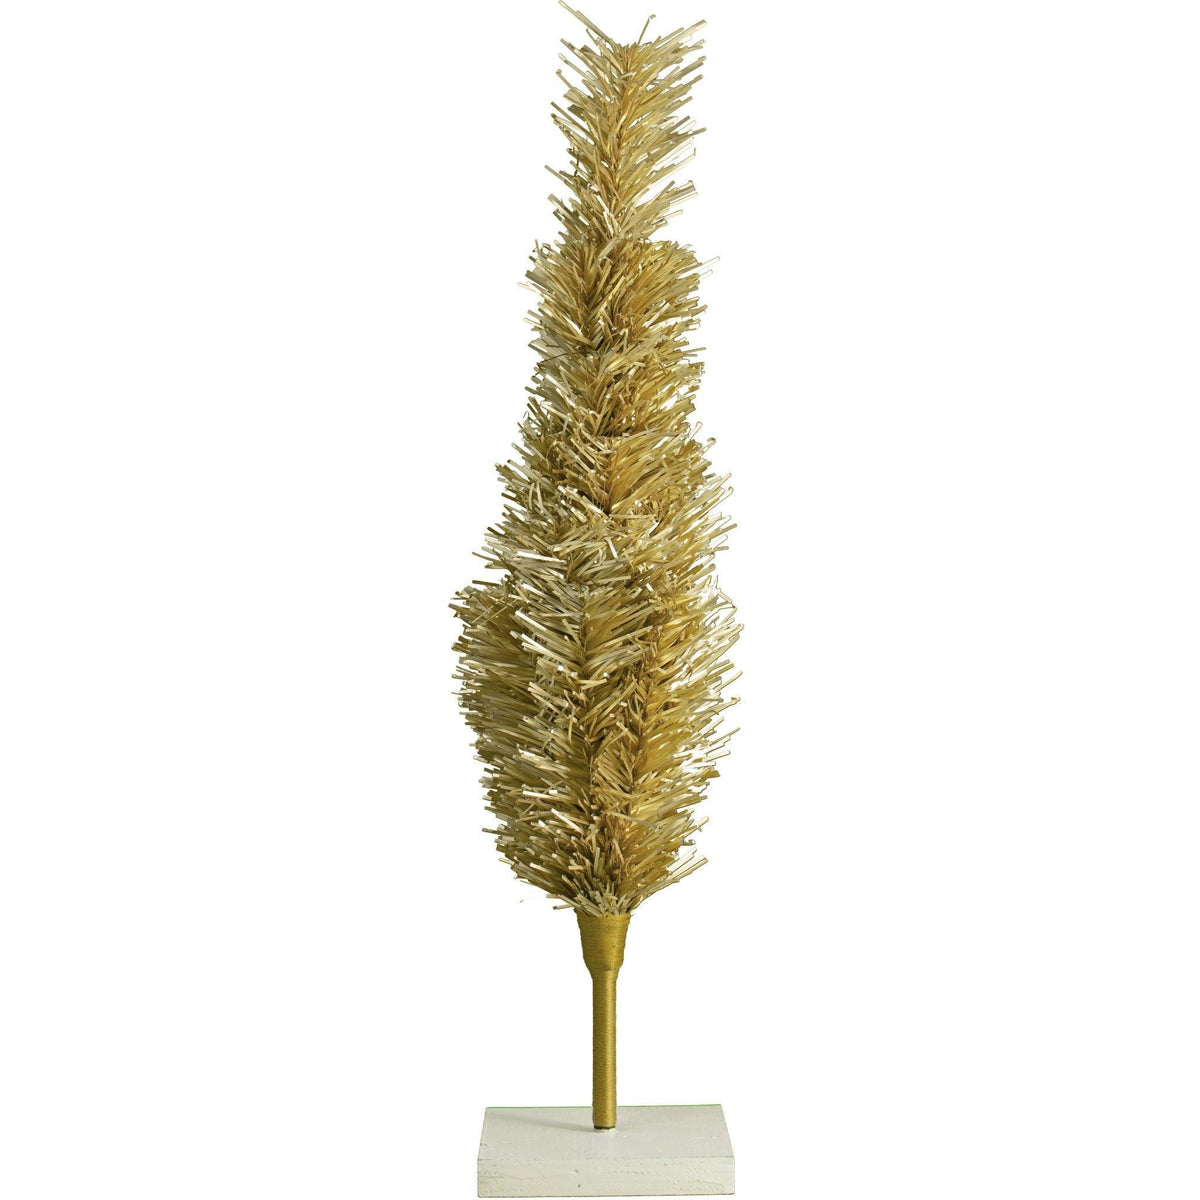 Our 18in Tall Antique Gold Christmas Tree has folding branches to shape how you like and safely store in your closet. 